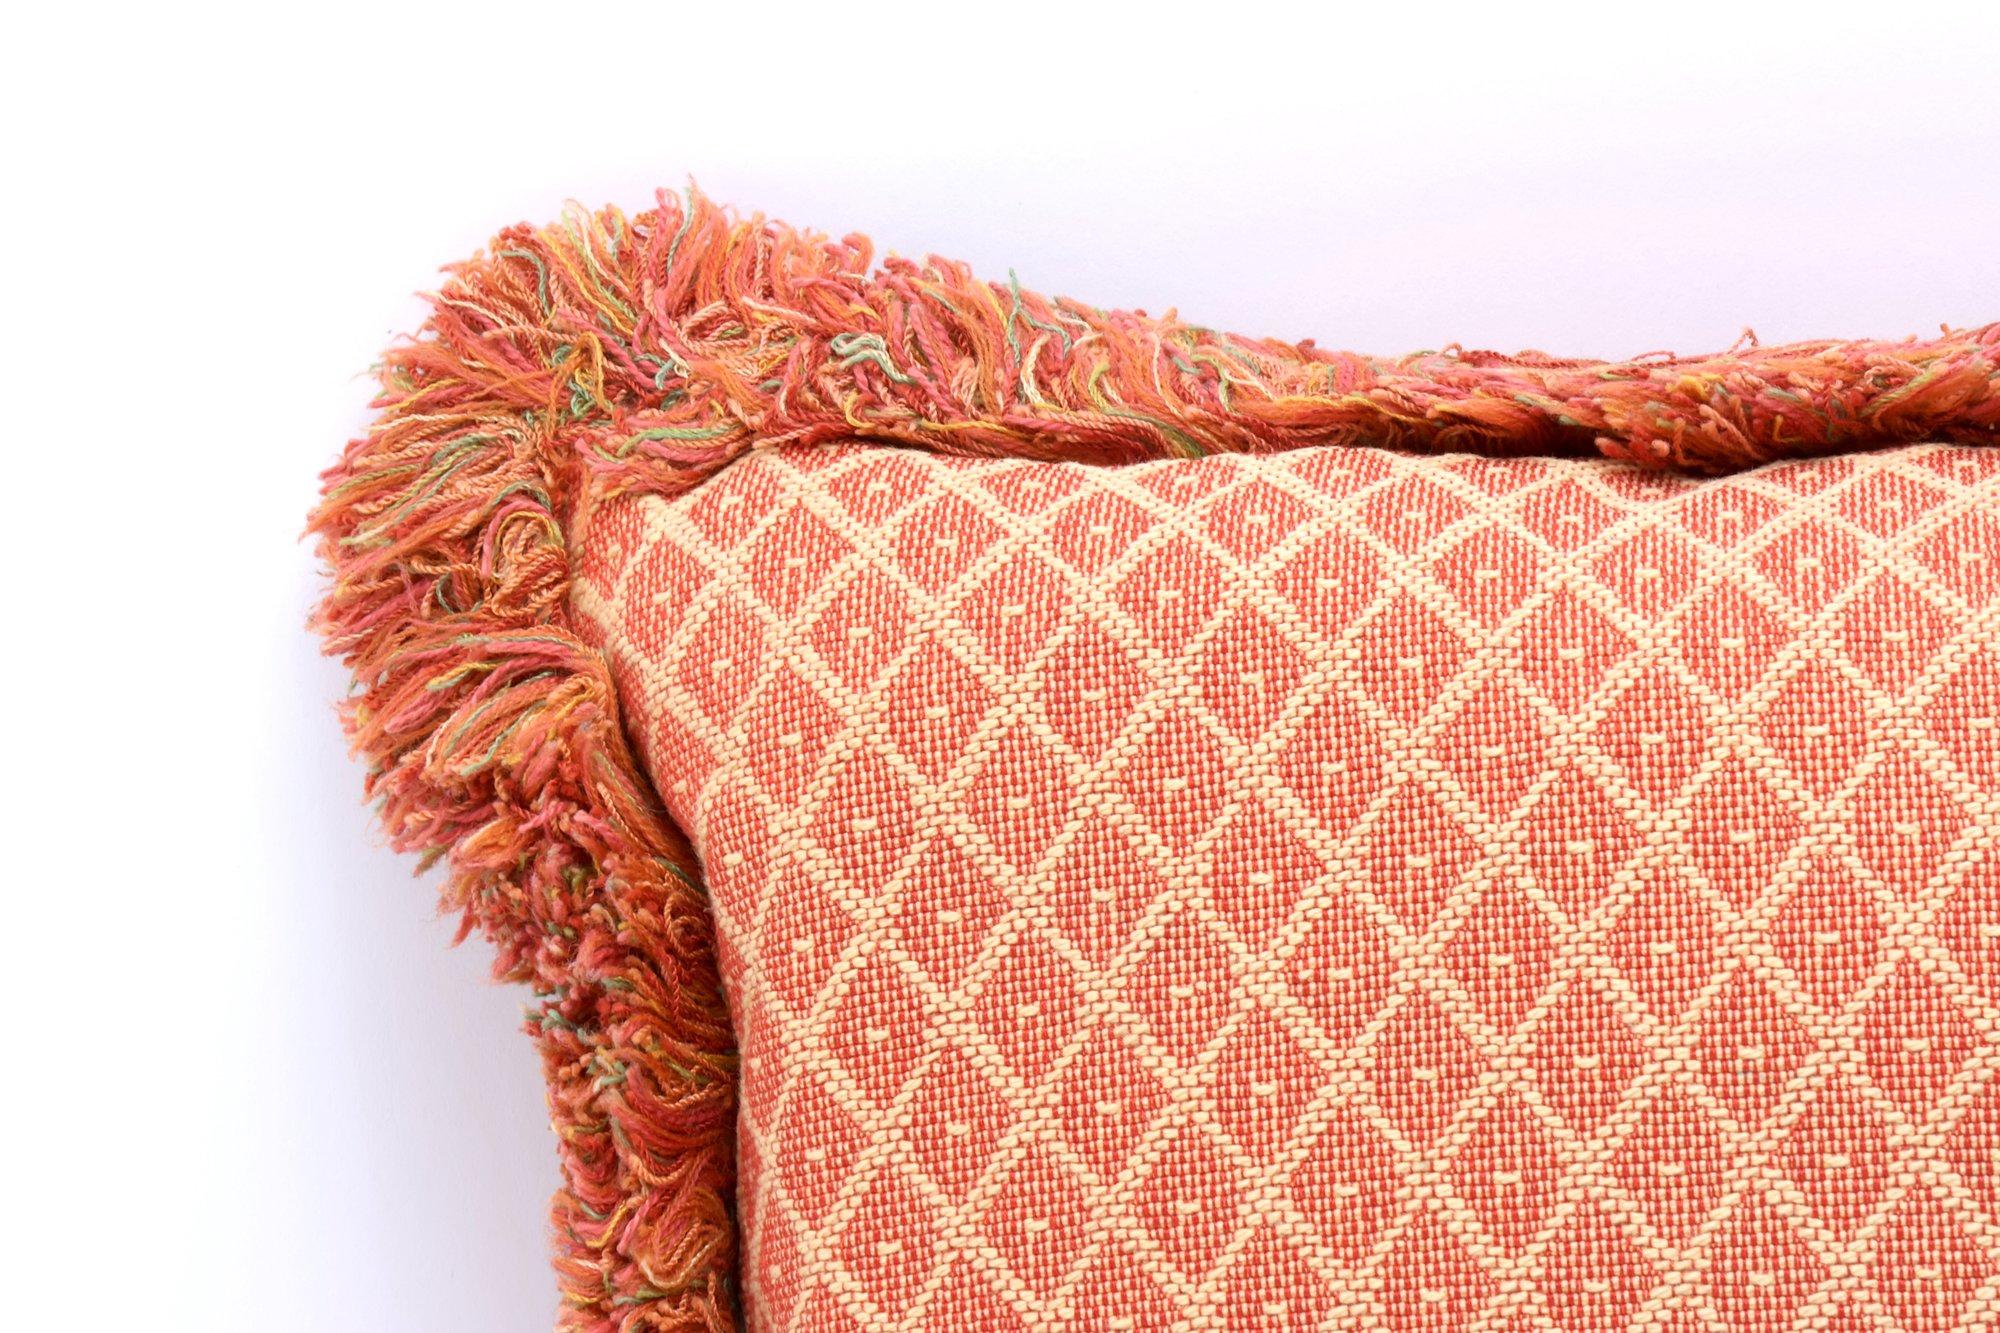 Custom Cross Stitched Throw Pillows With Contrasting Fringe